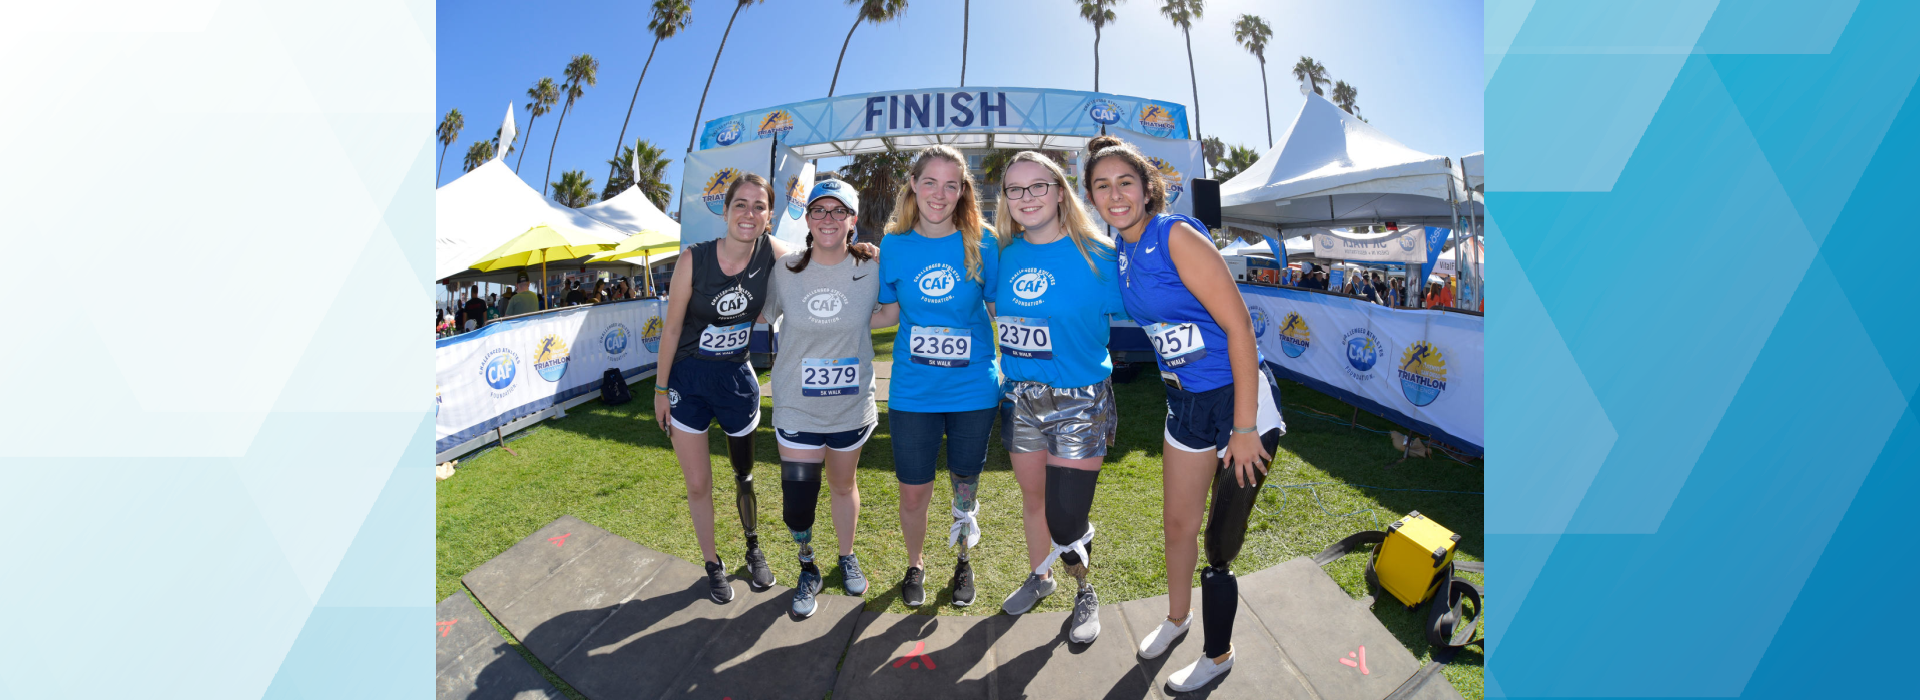 Group of teenagers at finish line of 2019 San Diego Triathlon Challenge